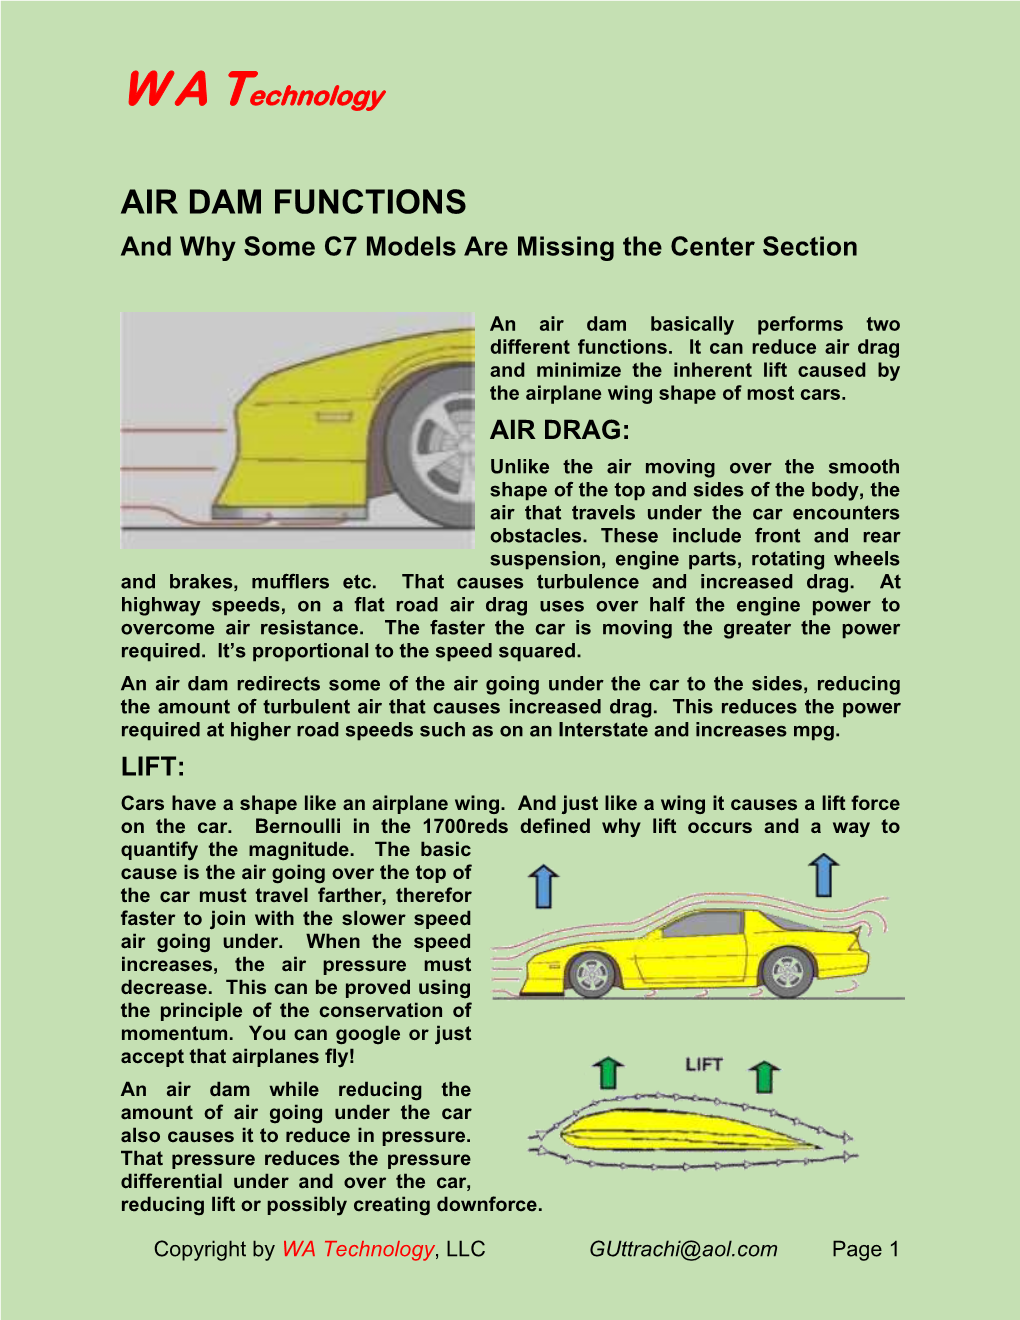 AIR DAM FUNCTIONS and Why Some C7 Models Are Missing the Center Section